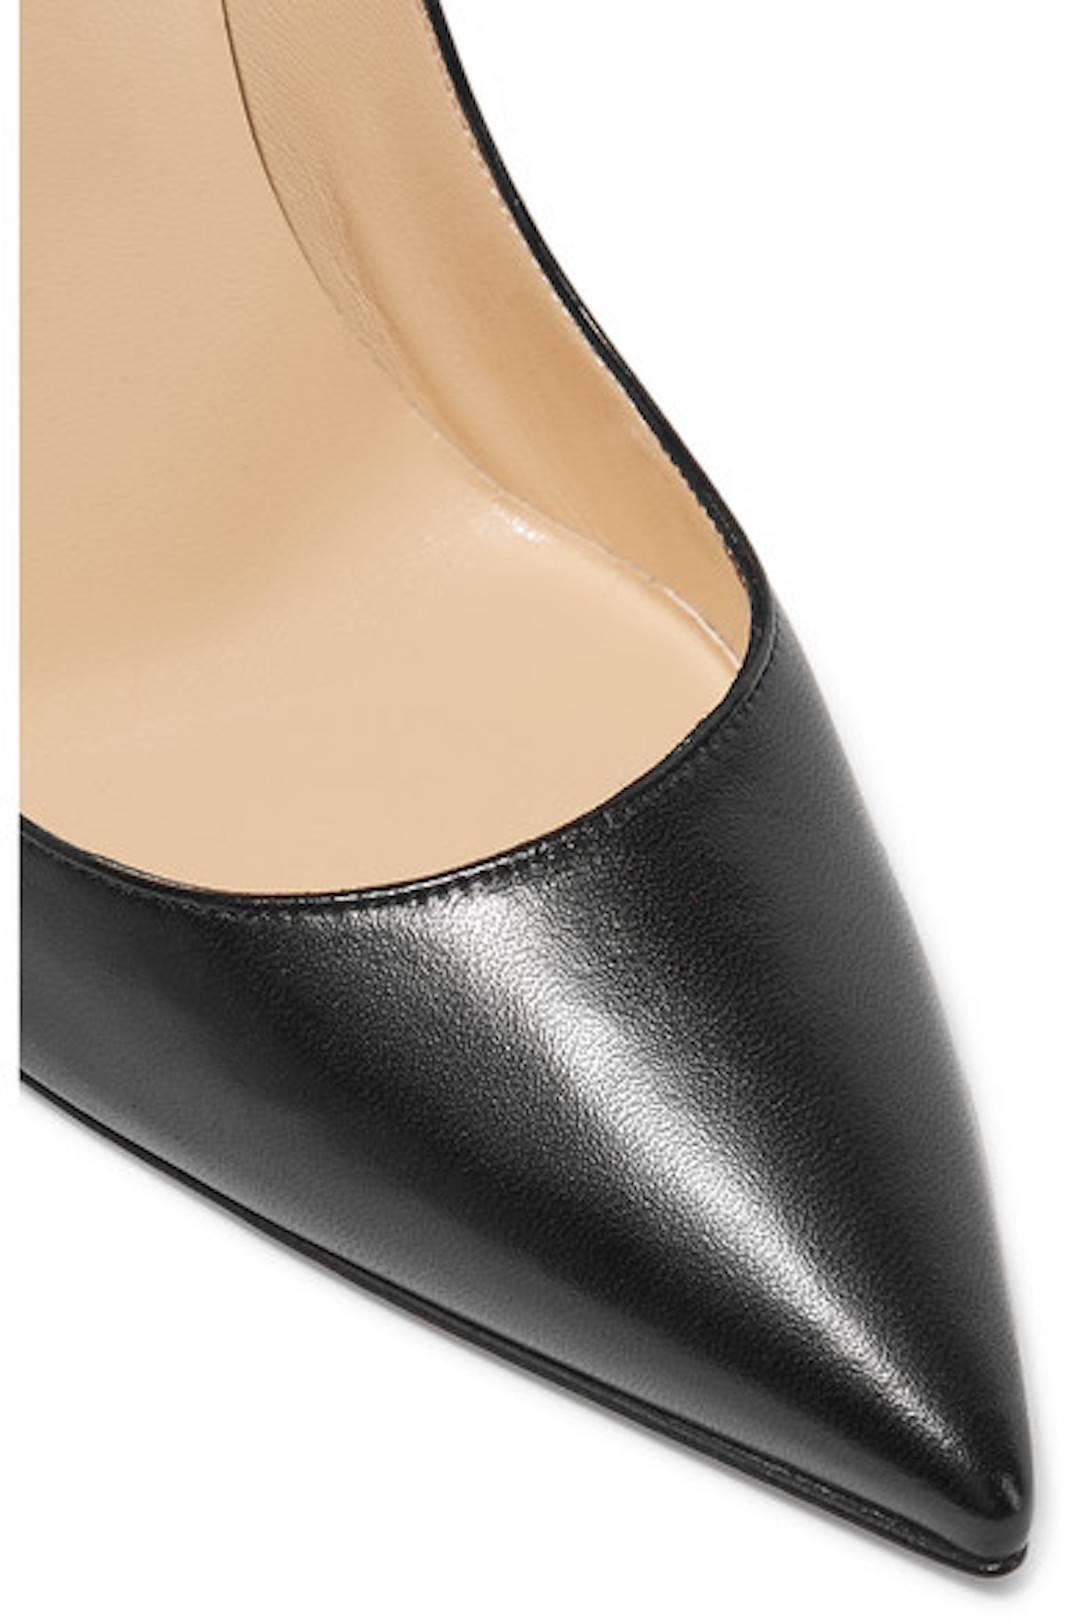 CURATOR'S NOTES

ONLY PAIR!  Christian Louboutin New Black Leather SO Kate High Heels Pumps in Box 

Size IT 36.5
Leather
Slip on
Made in Italy
Heel height 4.7